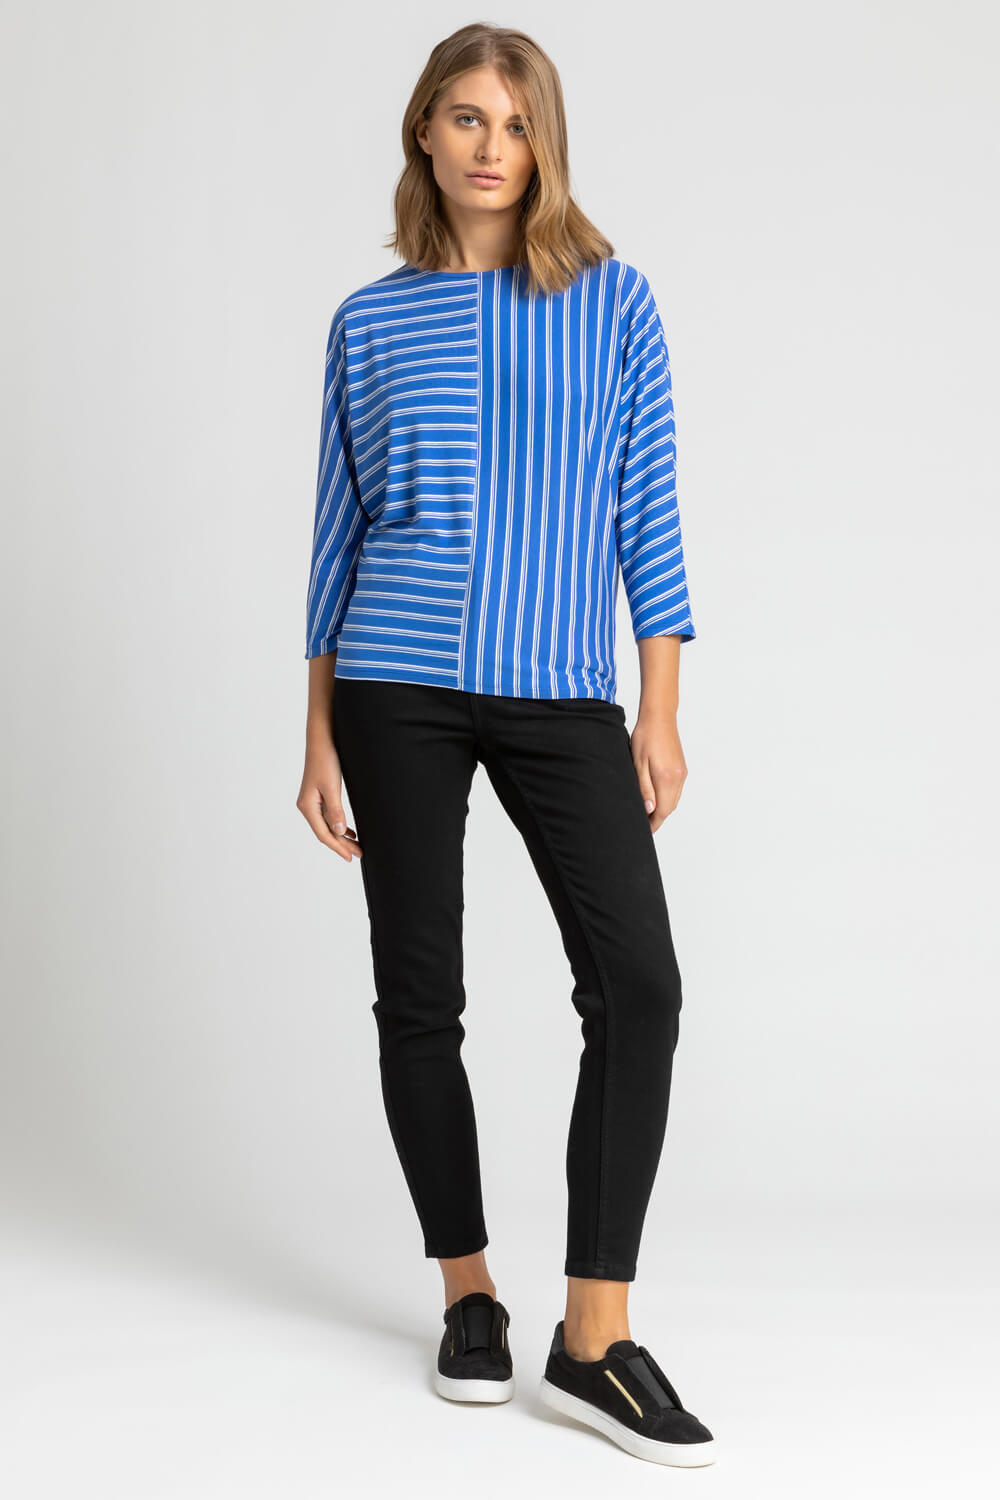 Blue Textured Stripe Print Top, Image 3 of 5